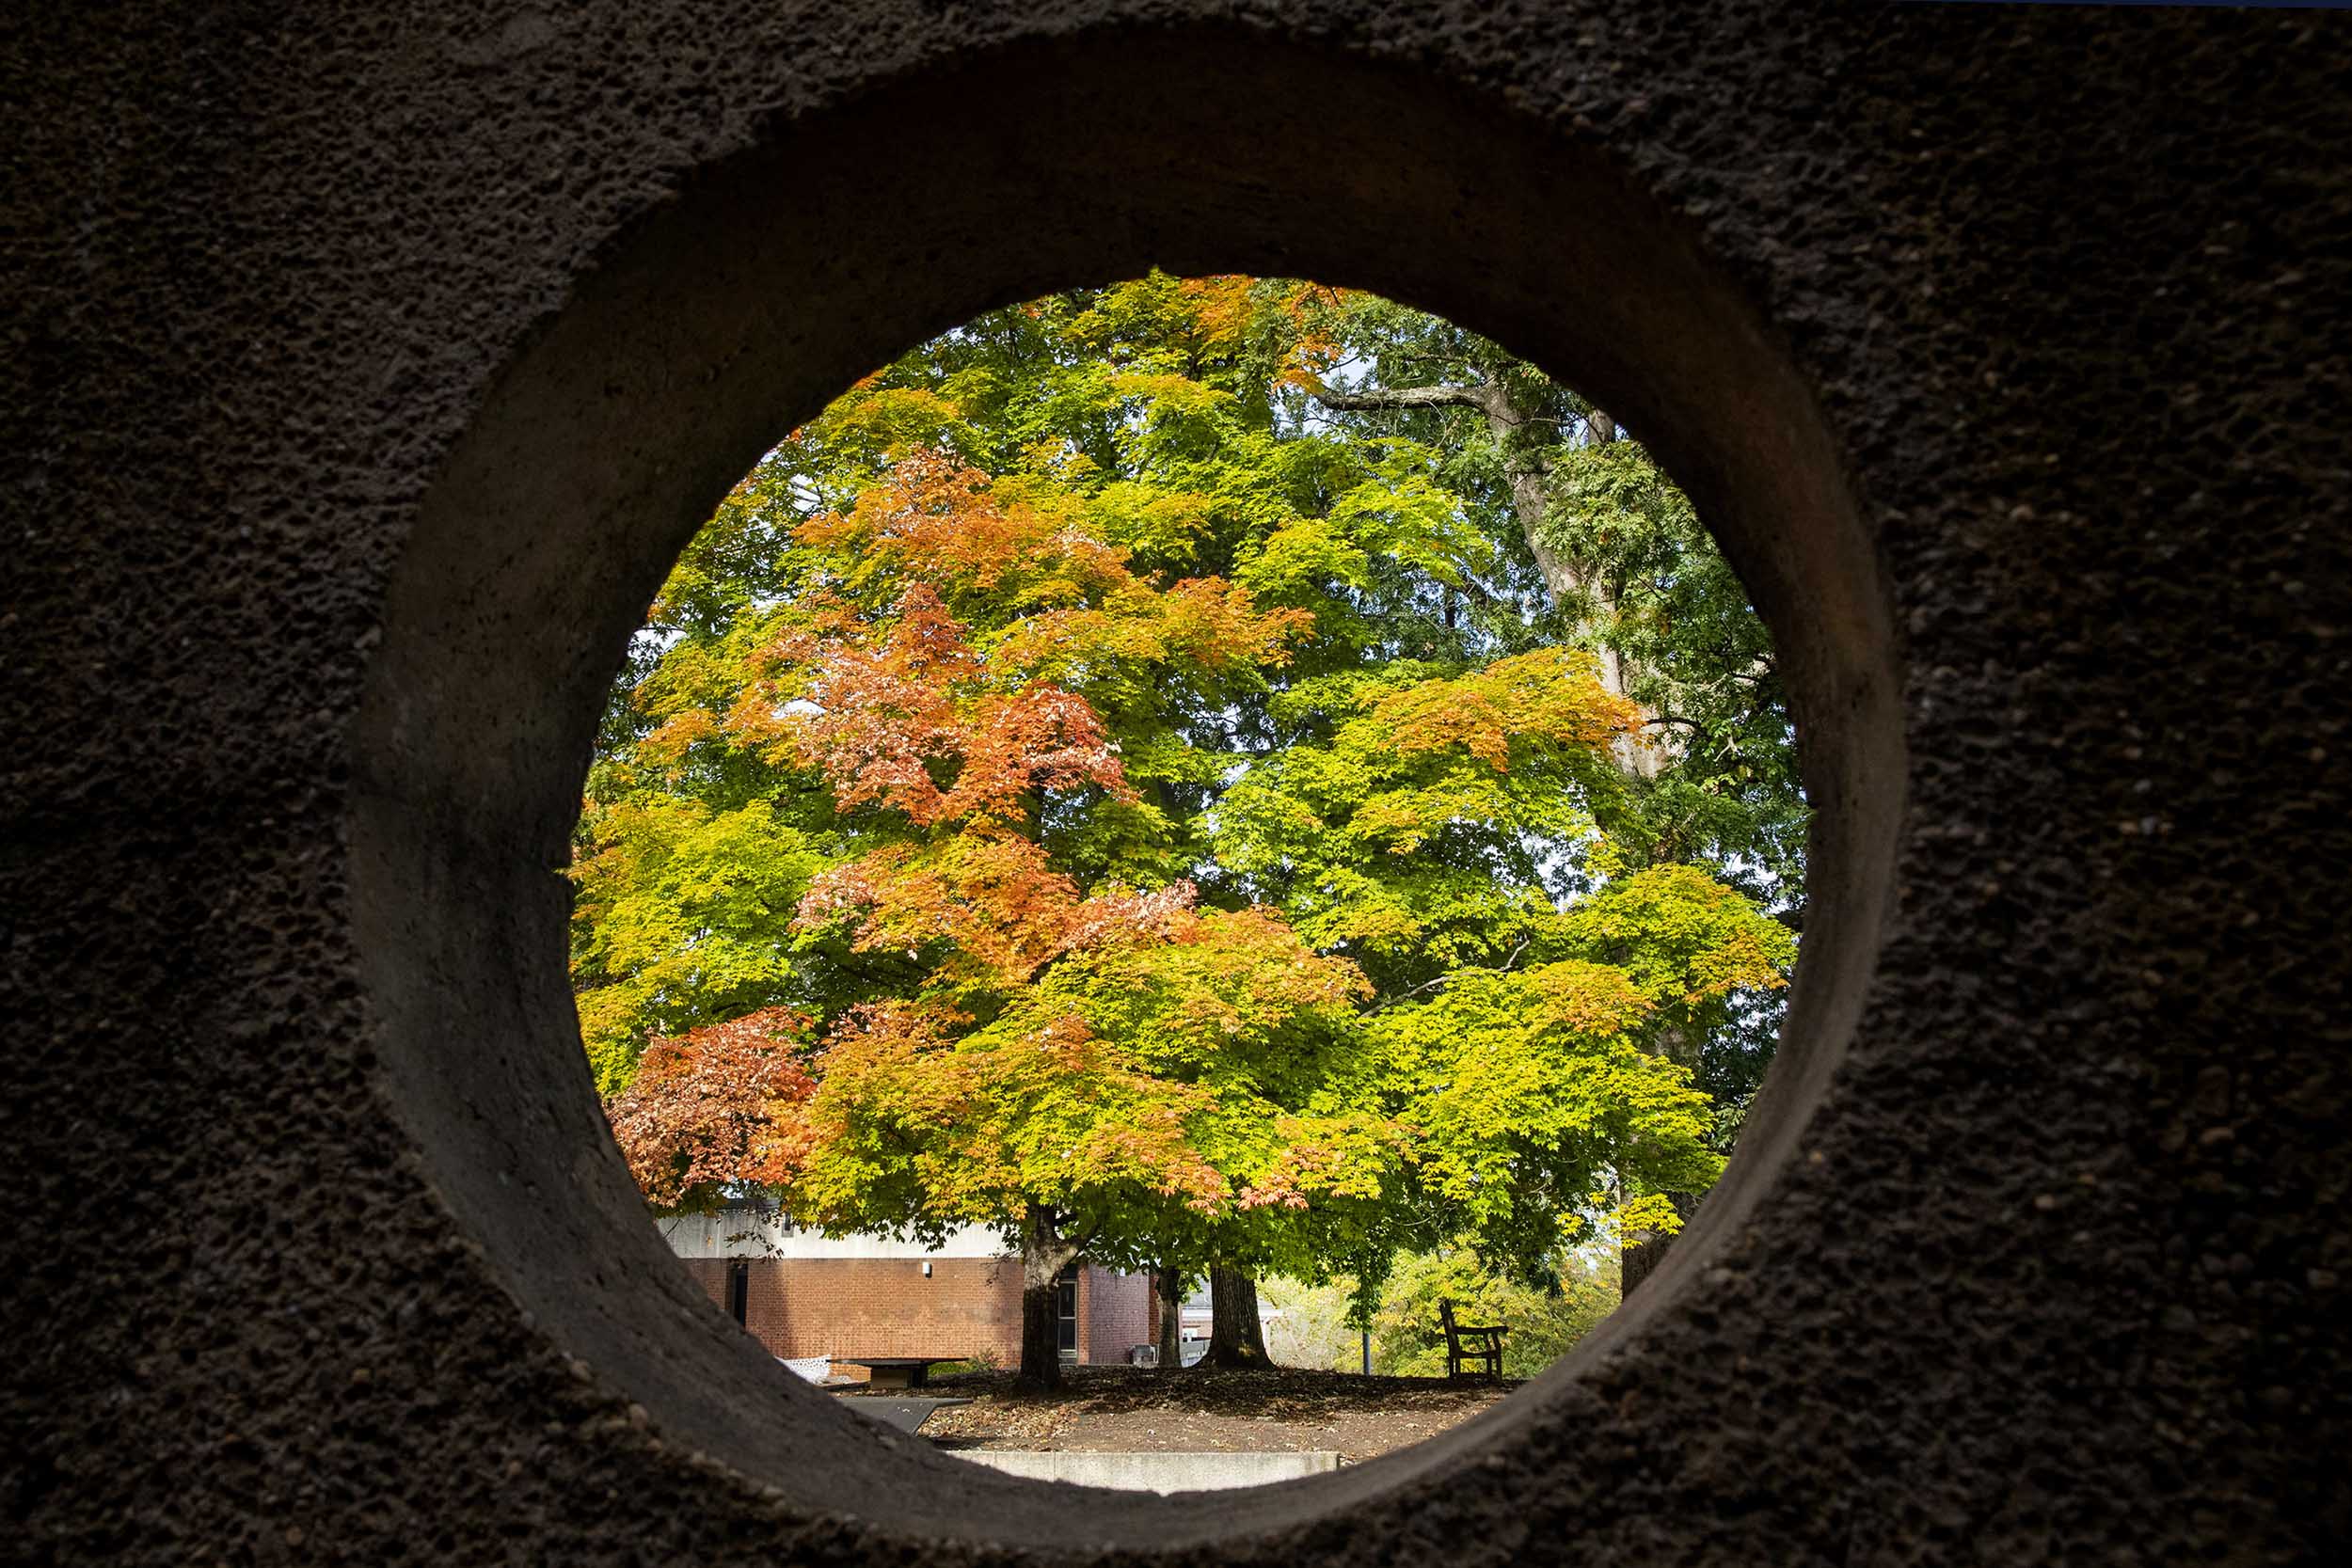 Looking at a tree changing orange, red, and yellow, through a circle hole in a sculpture